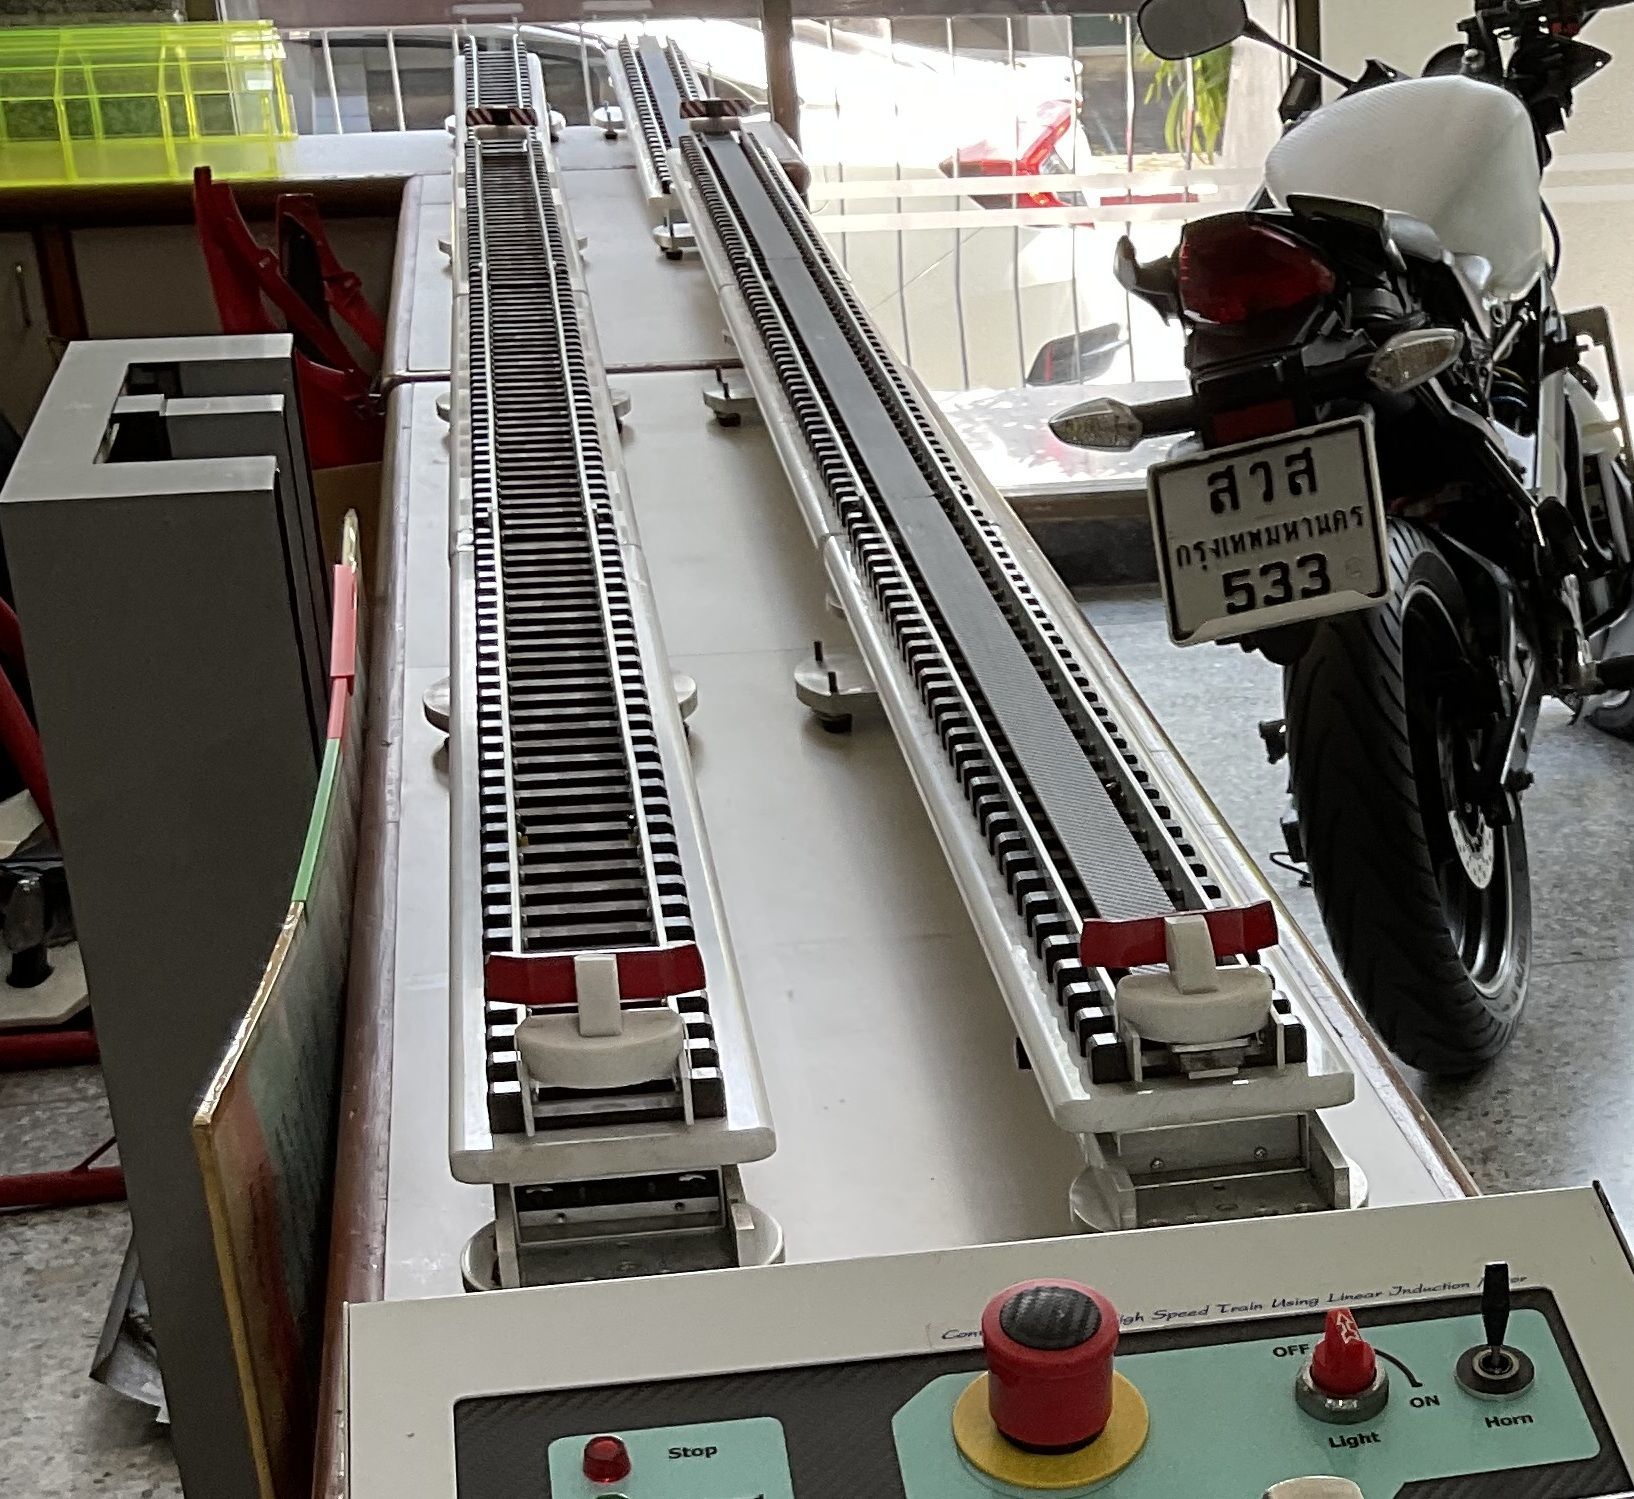 Latest innovation of twin-tracked rail system created by a team from the Electrical Engineering Department of Siam University.